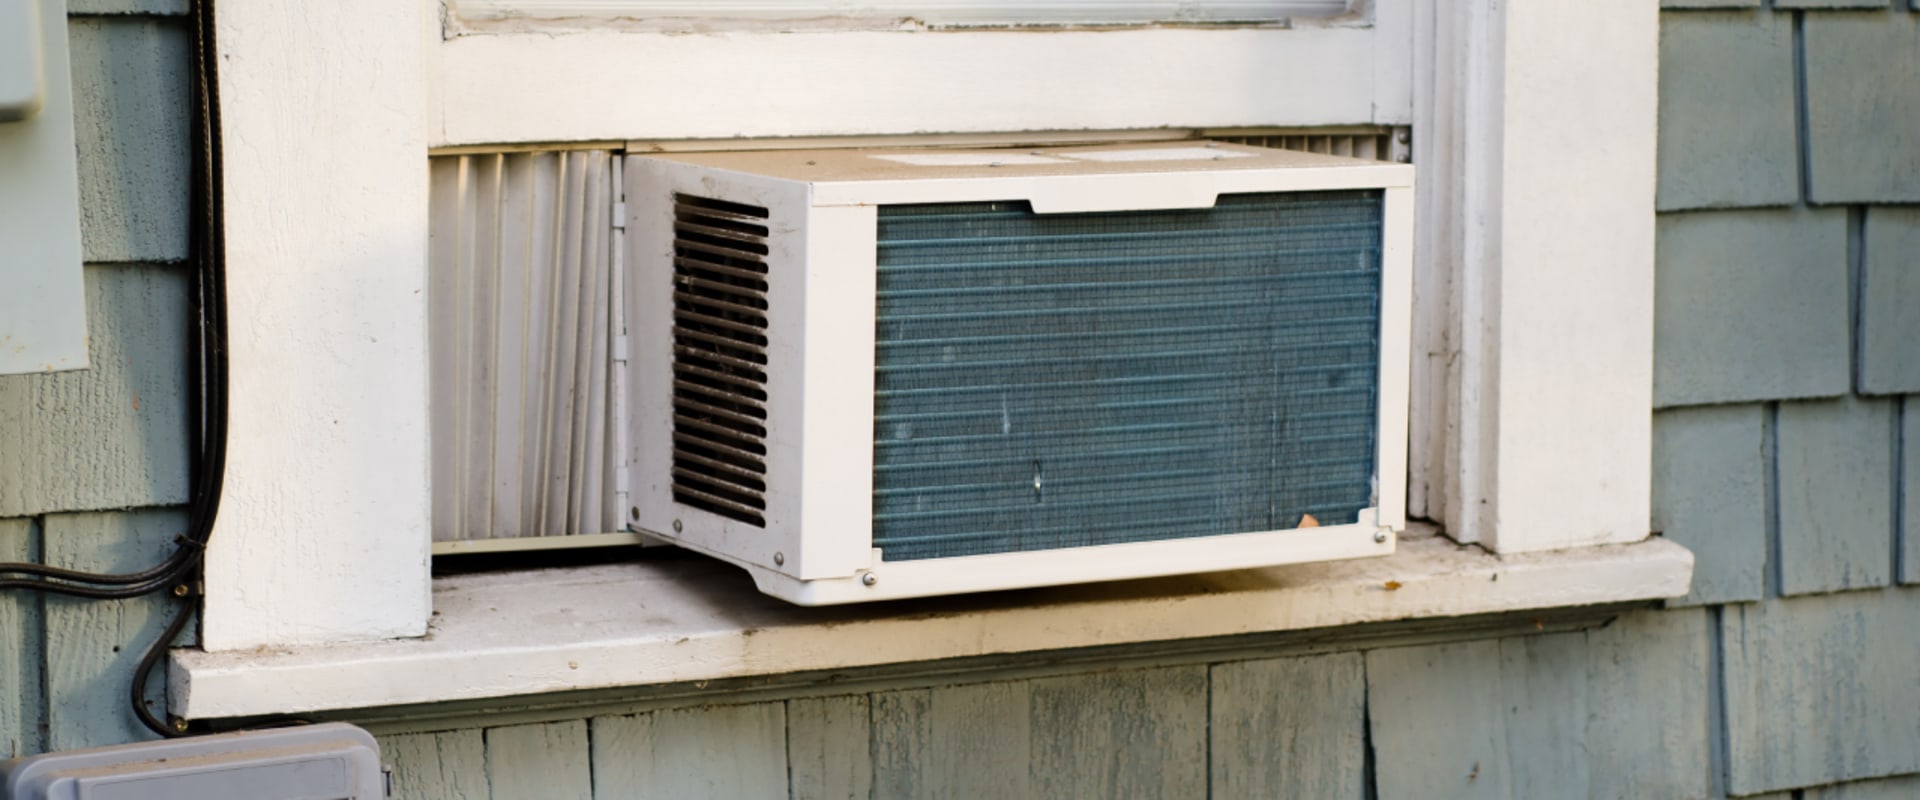 The Great Debate: Aircon - One Word or Two?